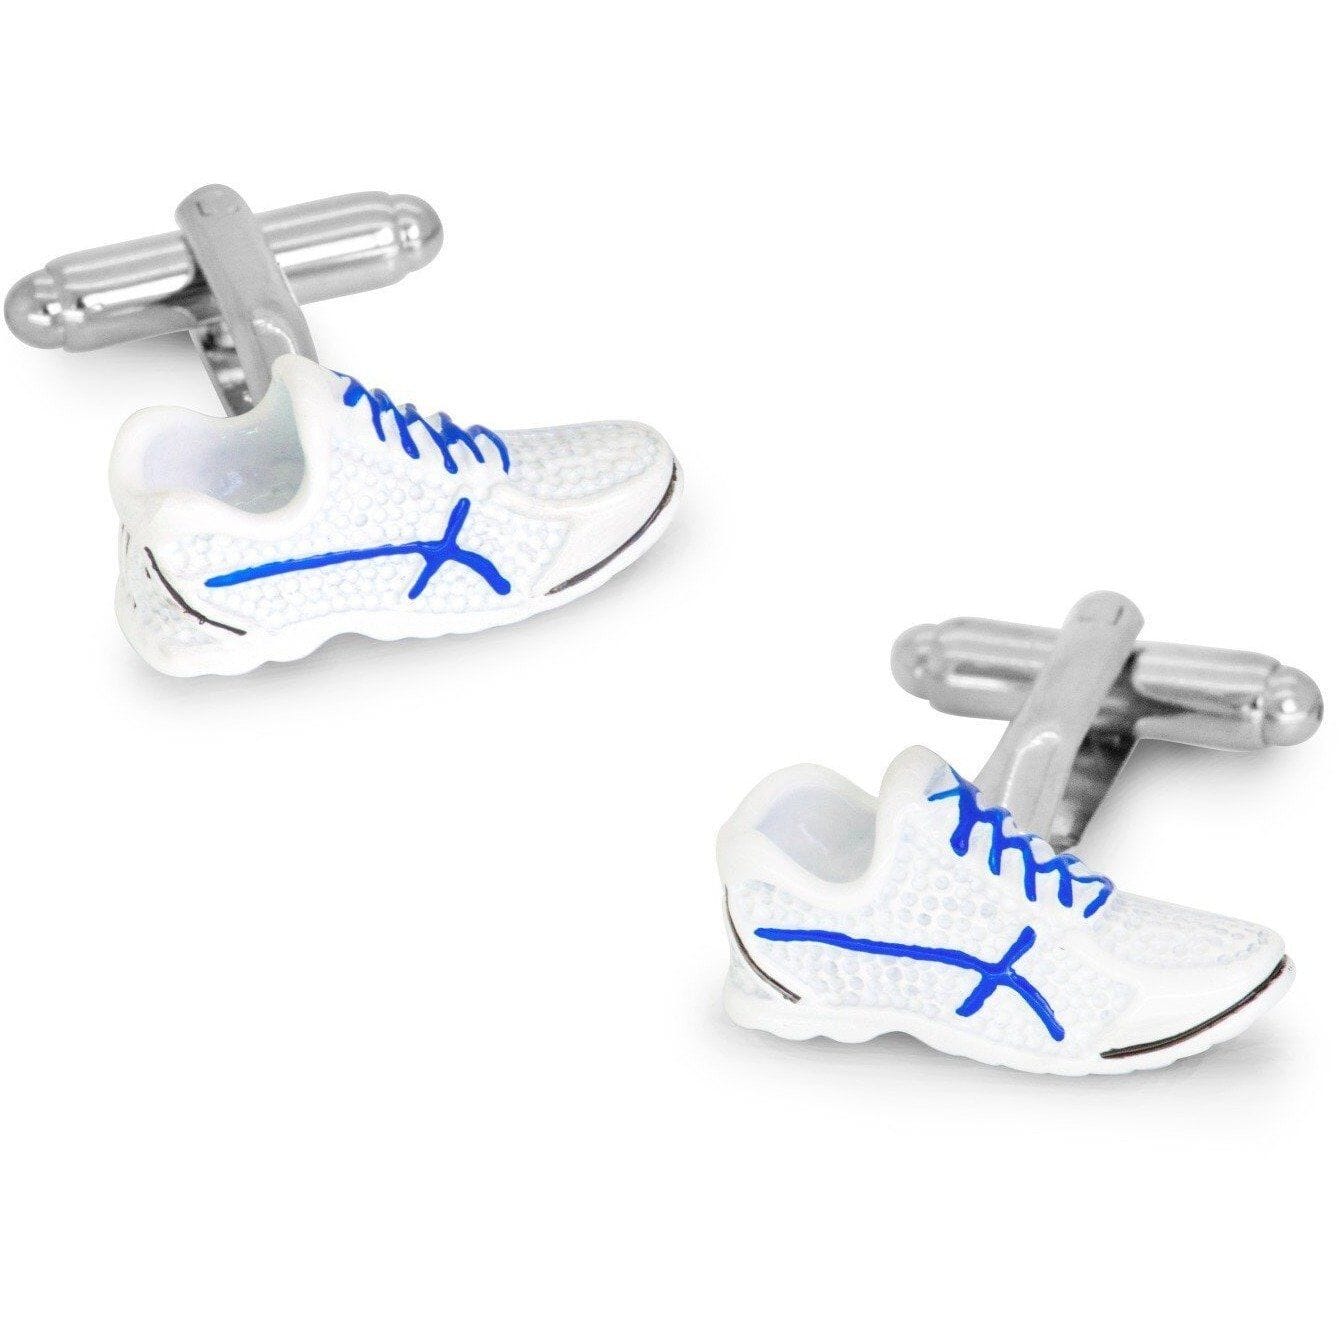 White Trainer Sneakers Cufflinks Novelty Cufflinks Clinks Australia White Trainer Sneakers Cufflinks 